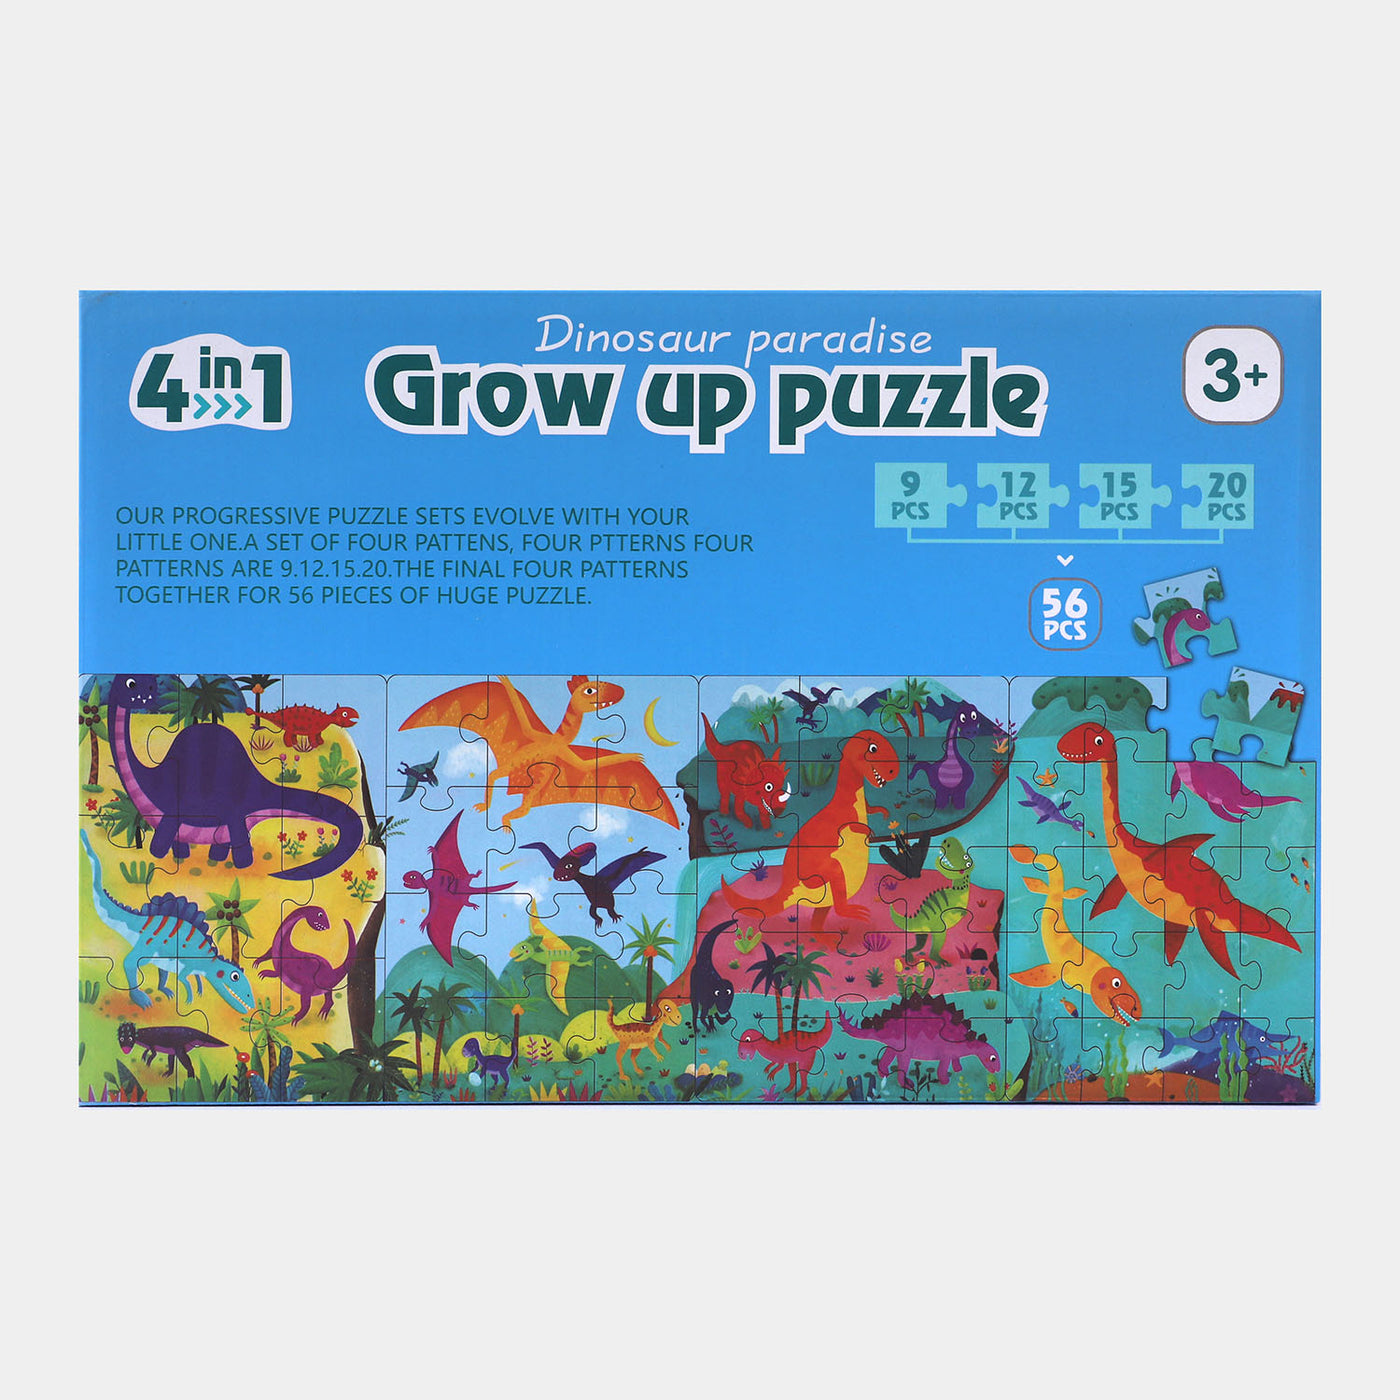 Puzzles Creative Games For Kids